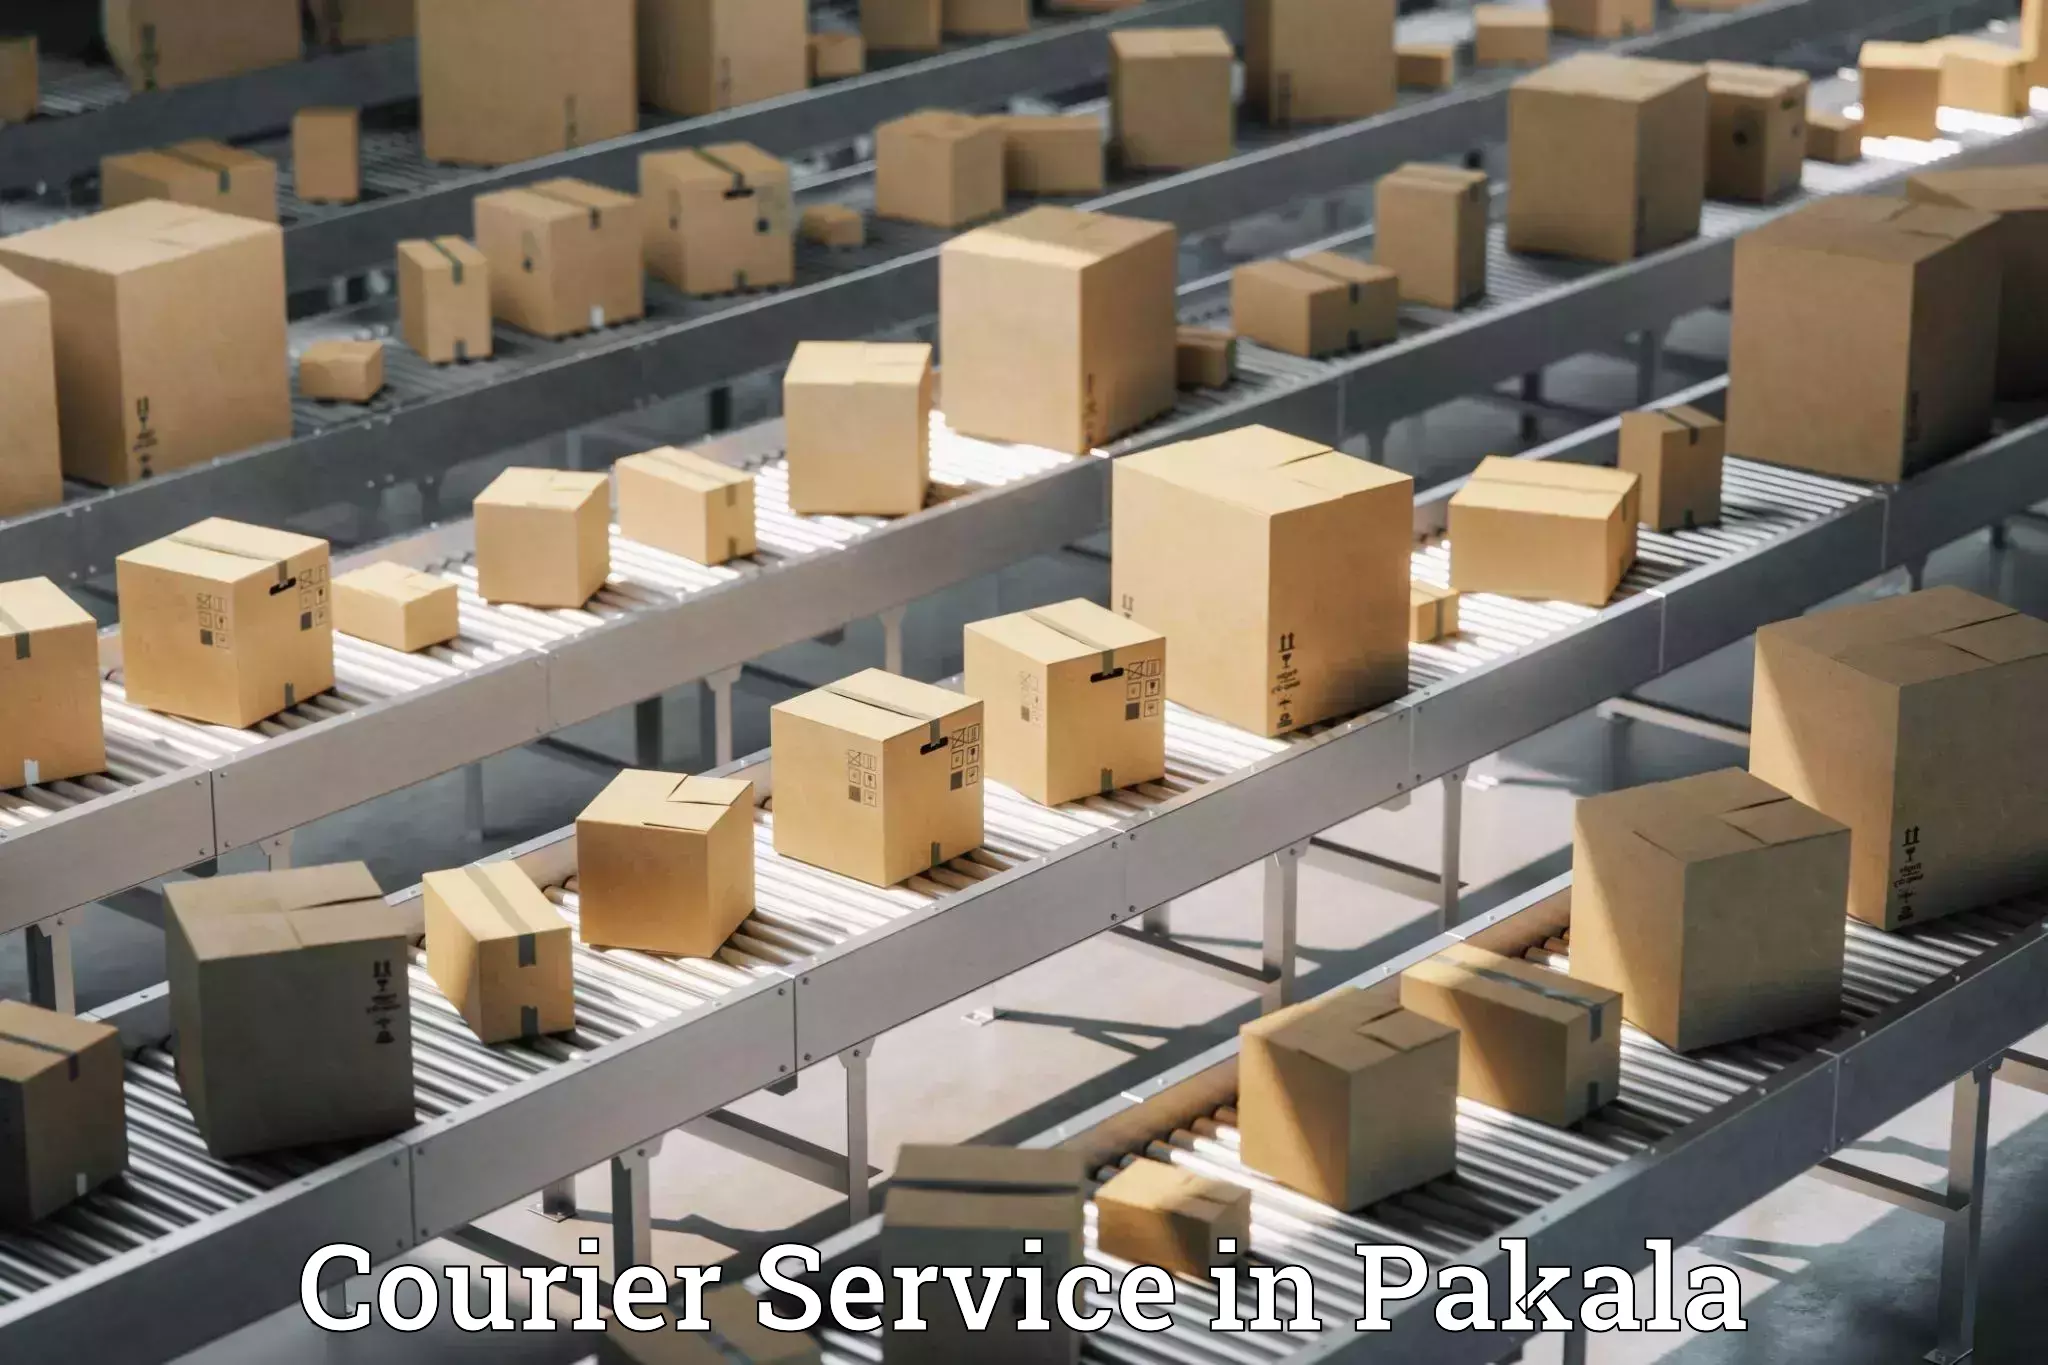 Efficient parcel tracking in Pakala